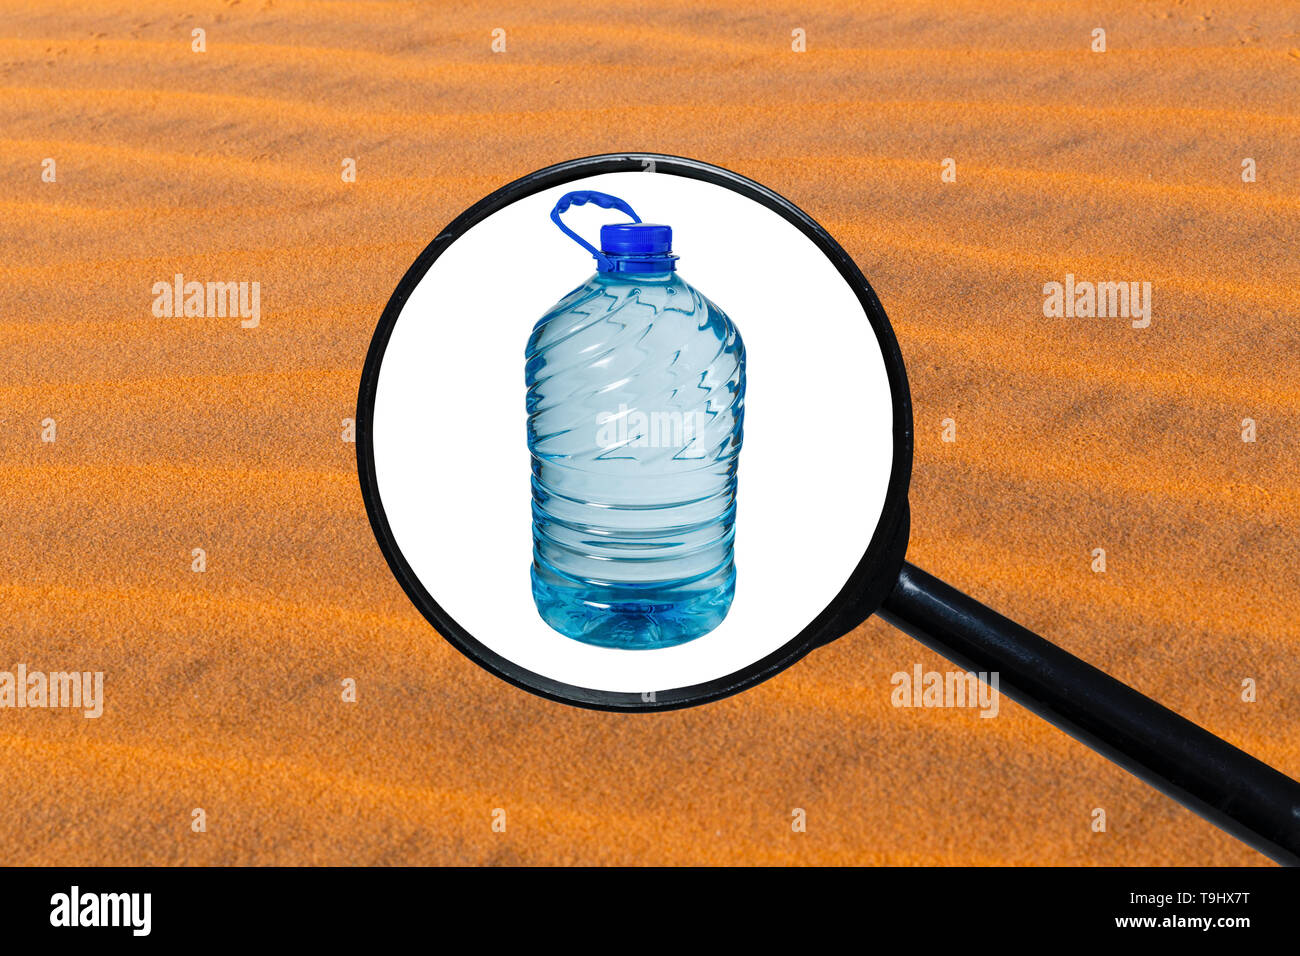 Big bottle of water isolated on a white background, view through a magnifying glass against the background of sand Stock Photo